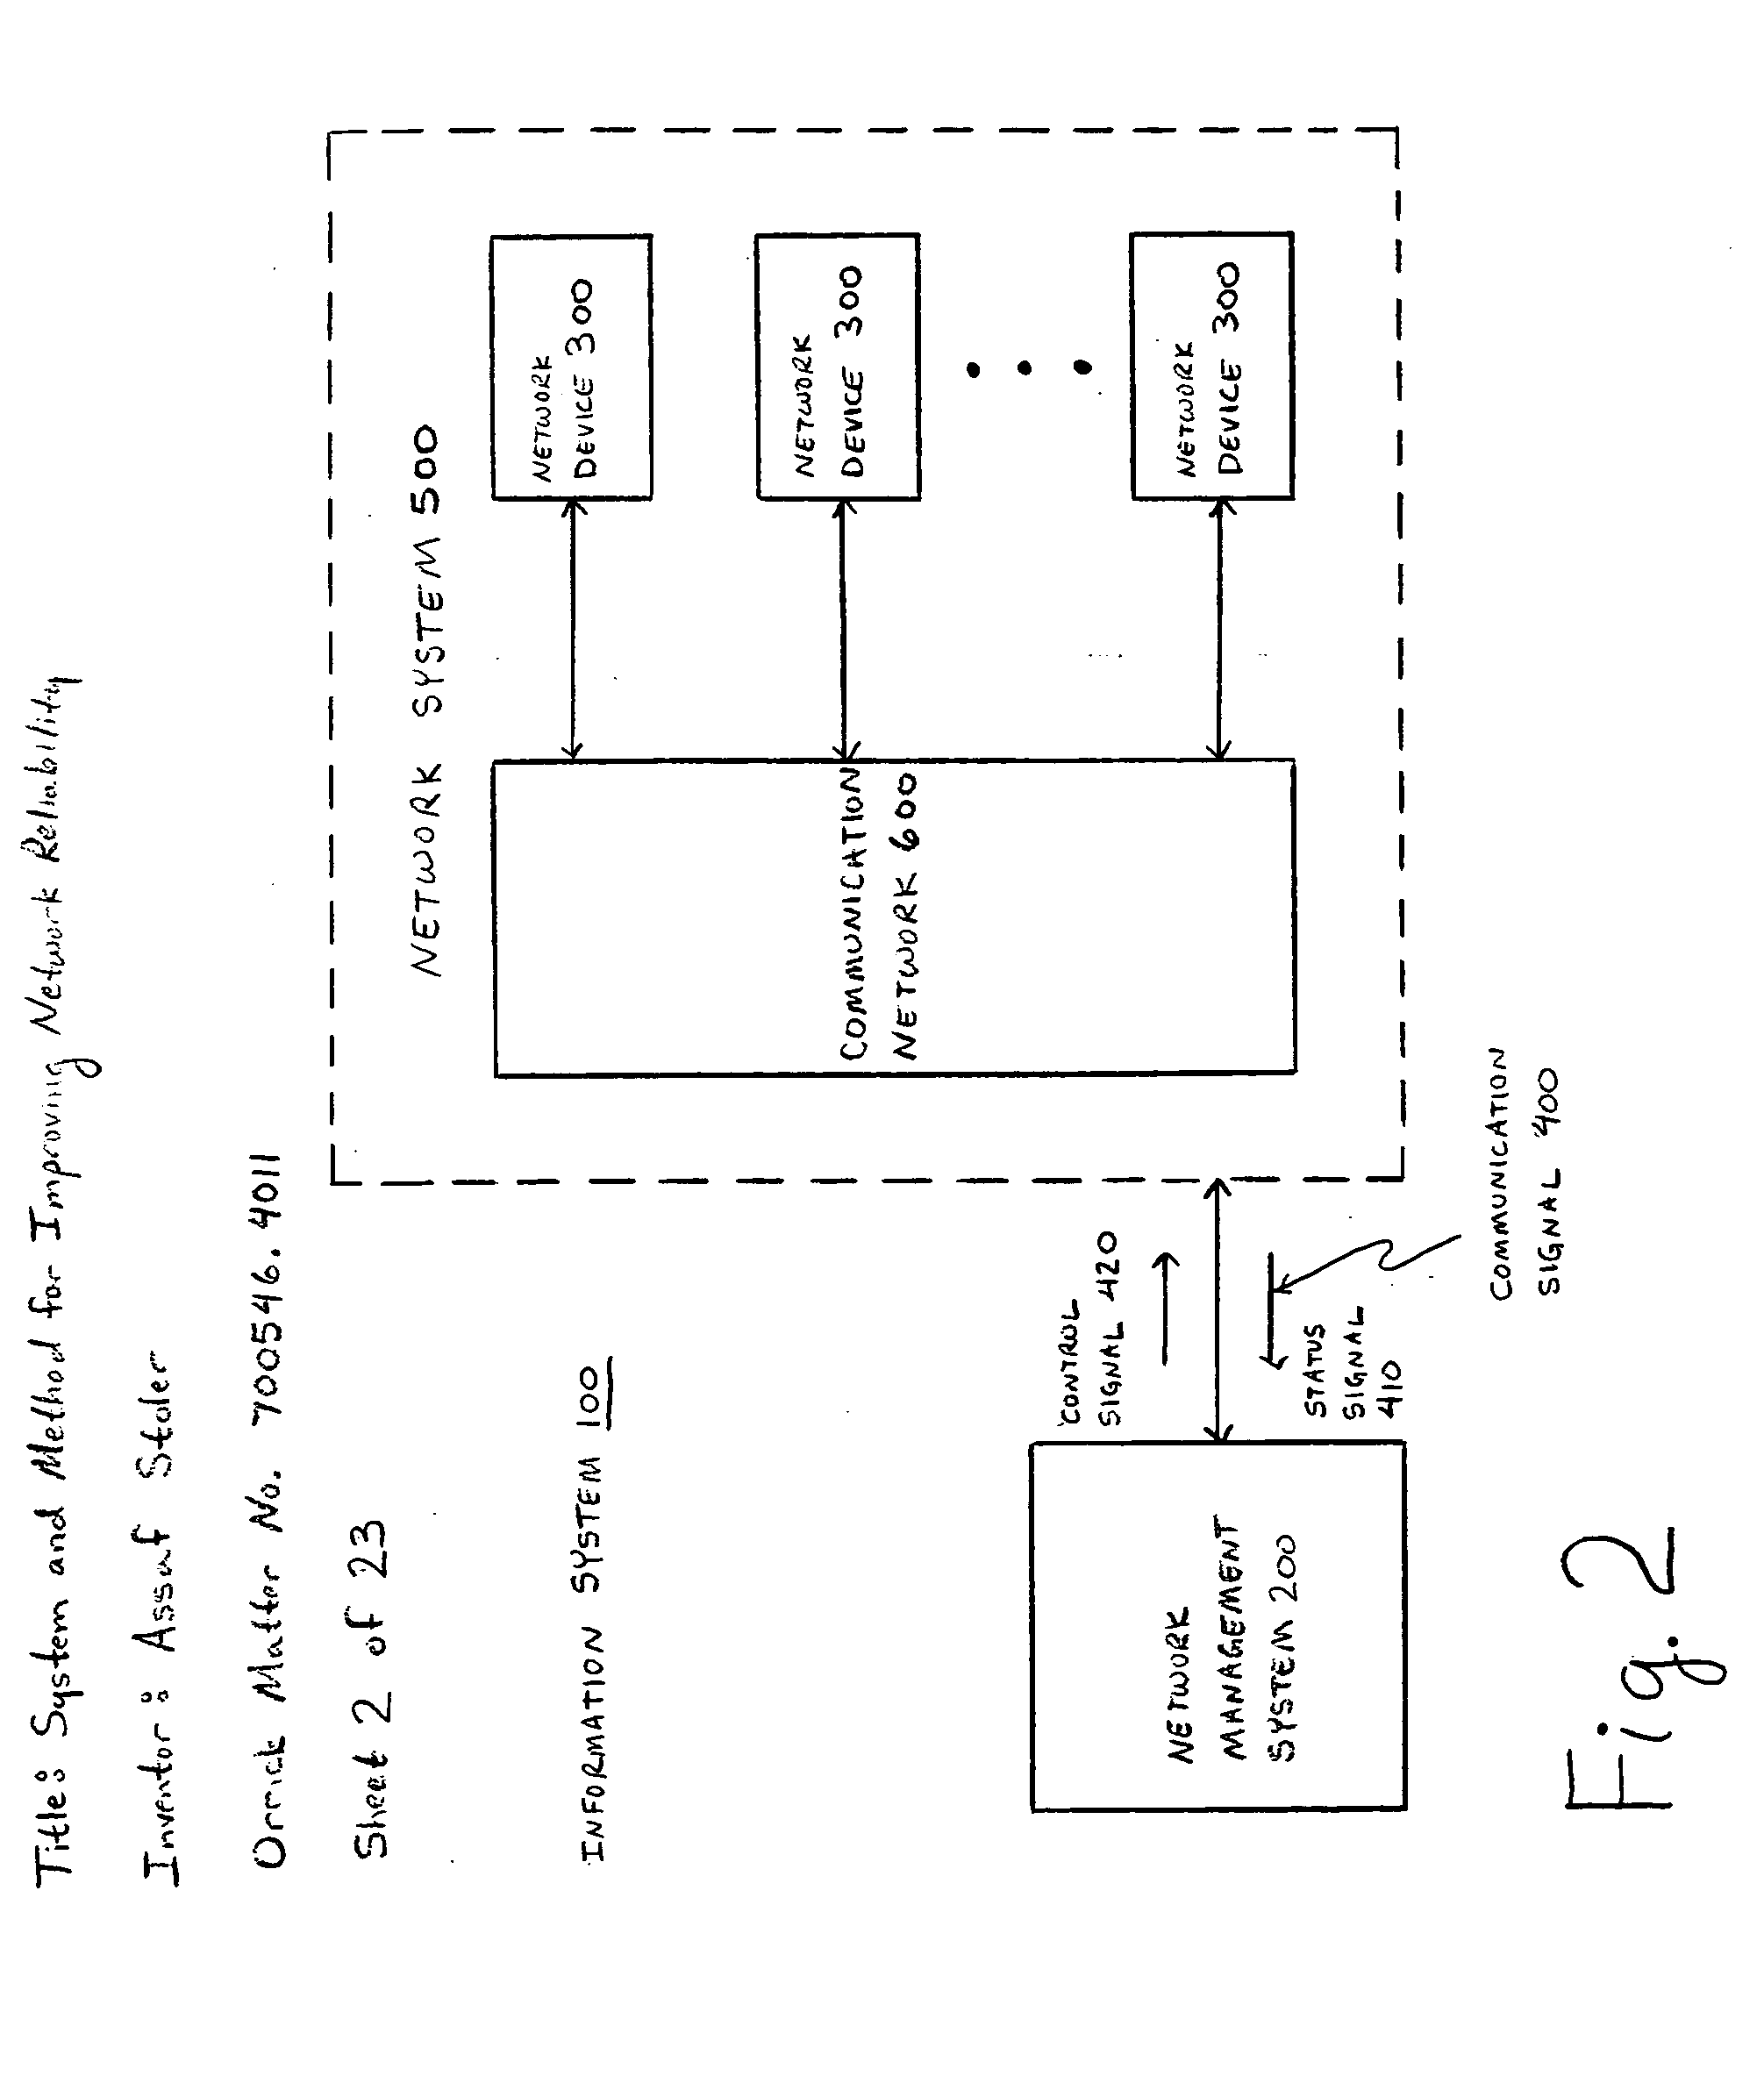 System and method for improving network reliability